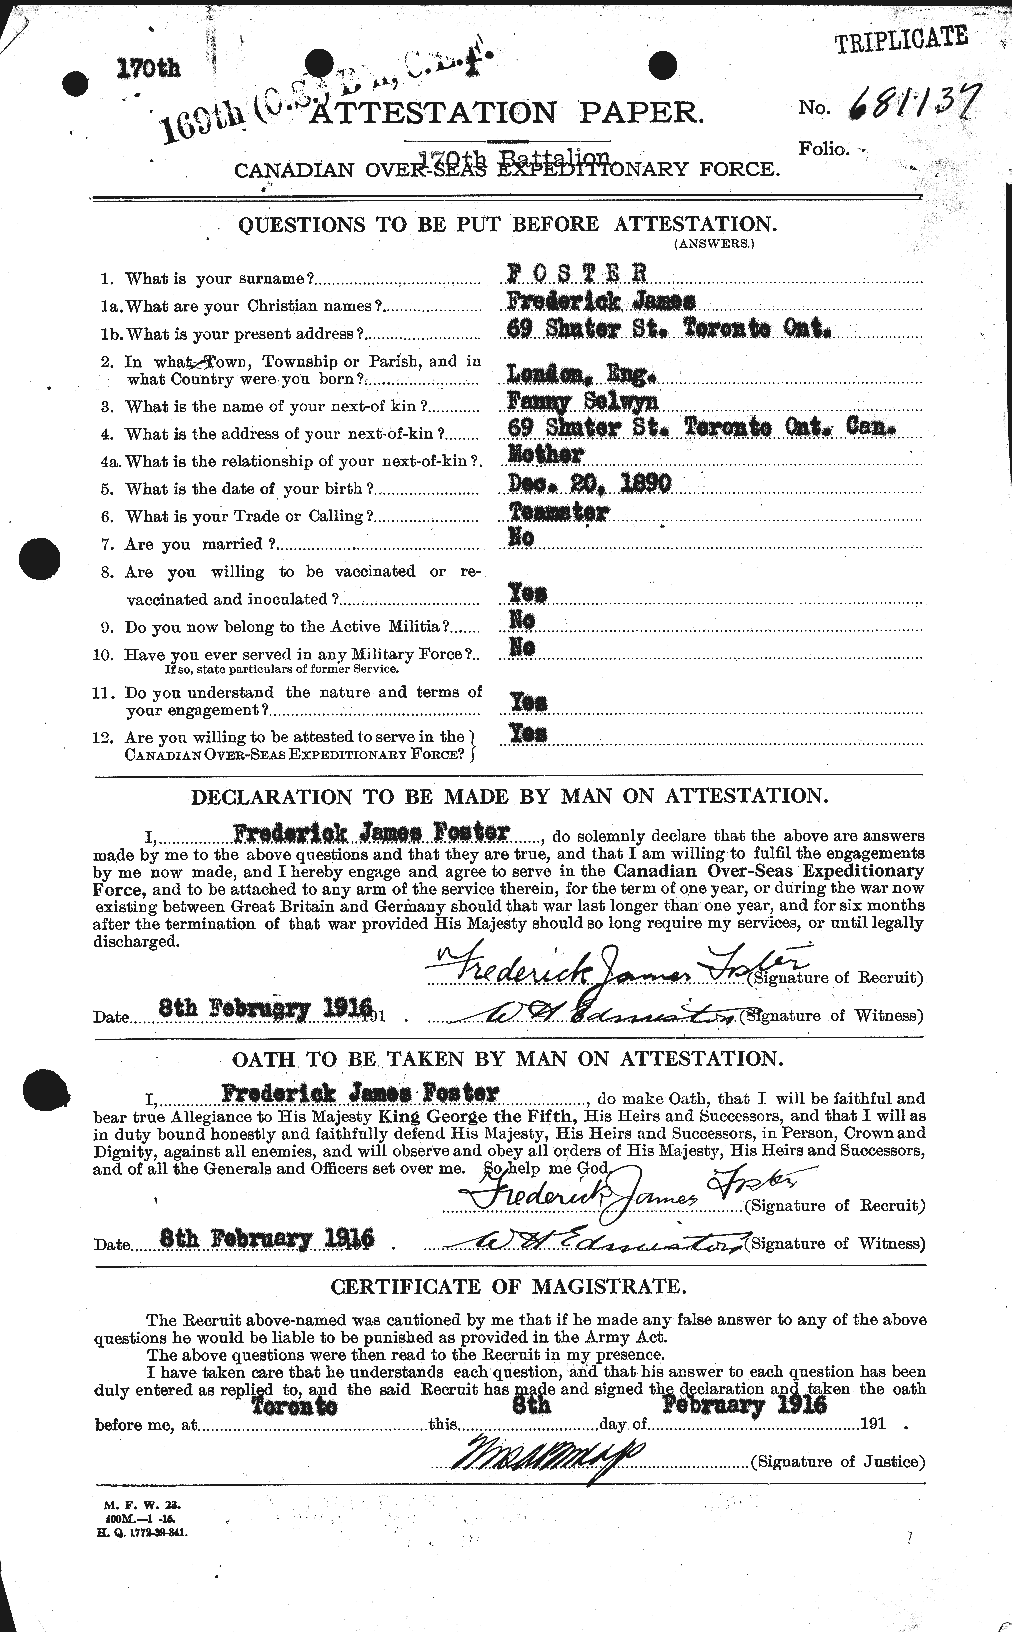 Personnel Records of the First World War - CEF 330653a